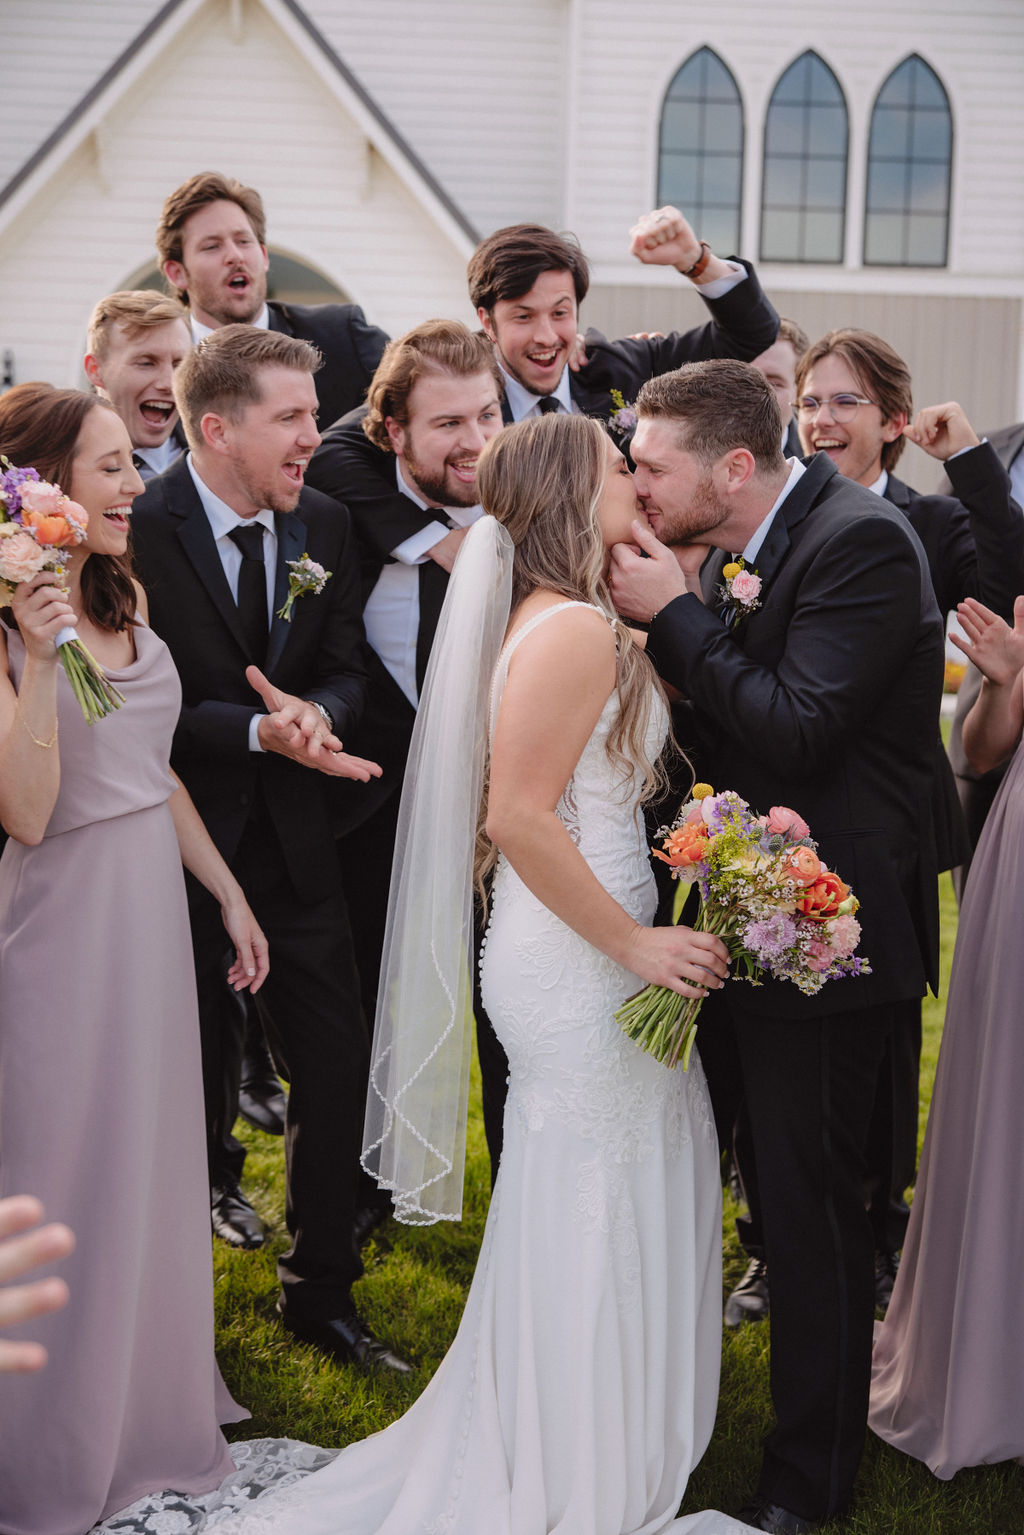 A bride and groom stand surrounded by their wedding party outside a white chapel, with the group cheering and smiling. The wedding party members are wearing matching dresses and suits at deep in the heart farms wedding venue